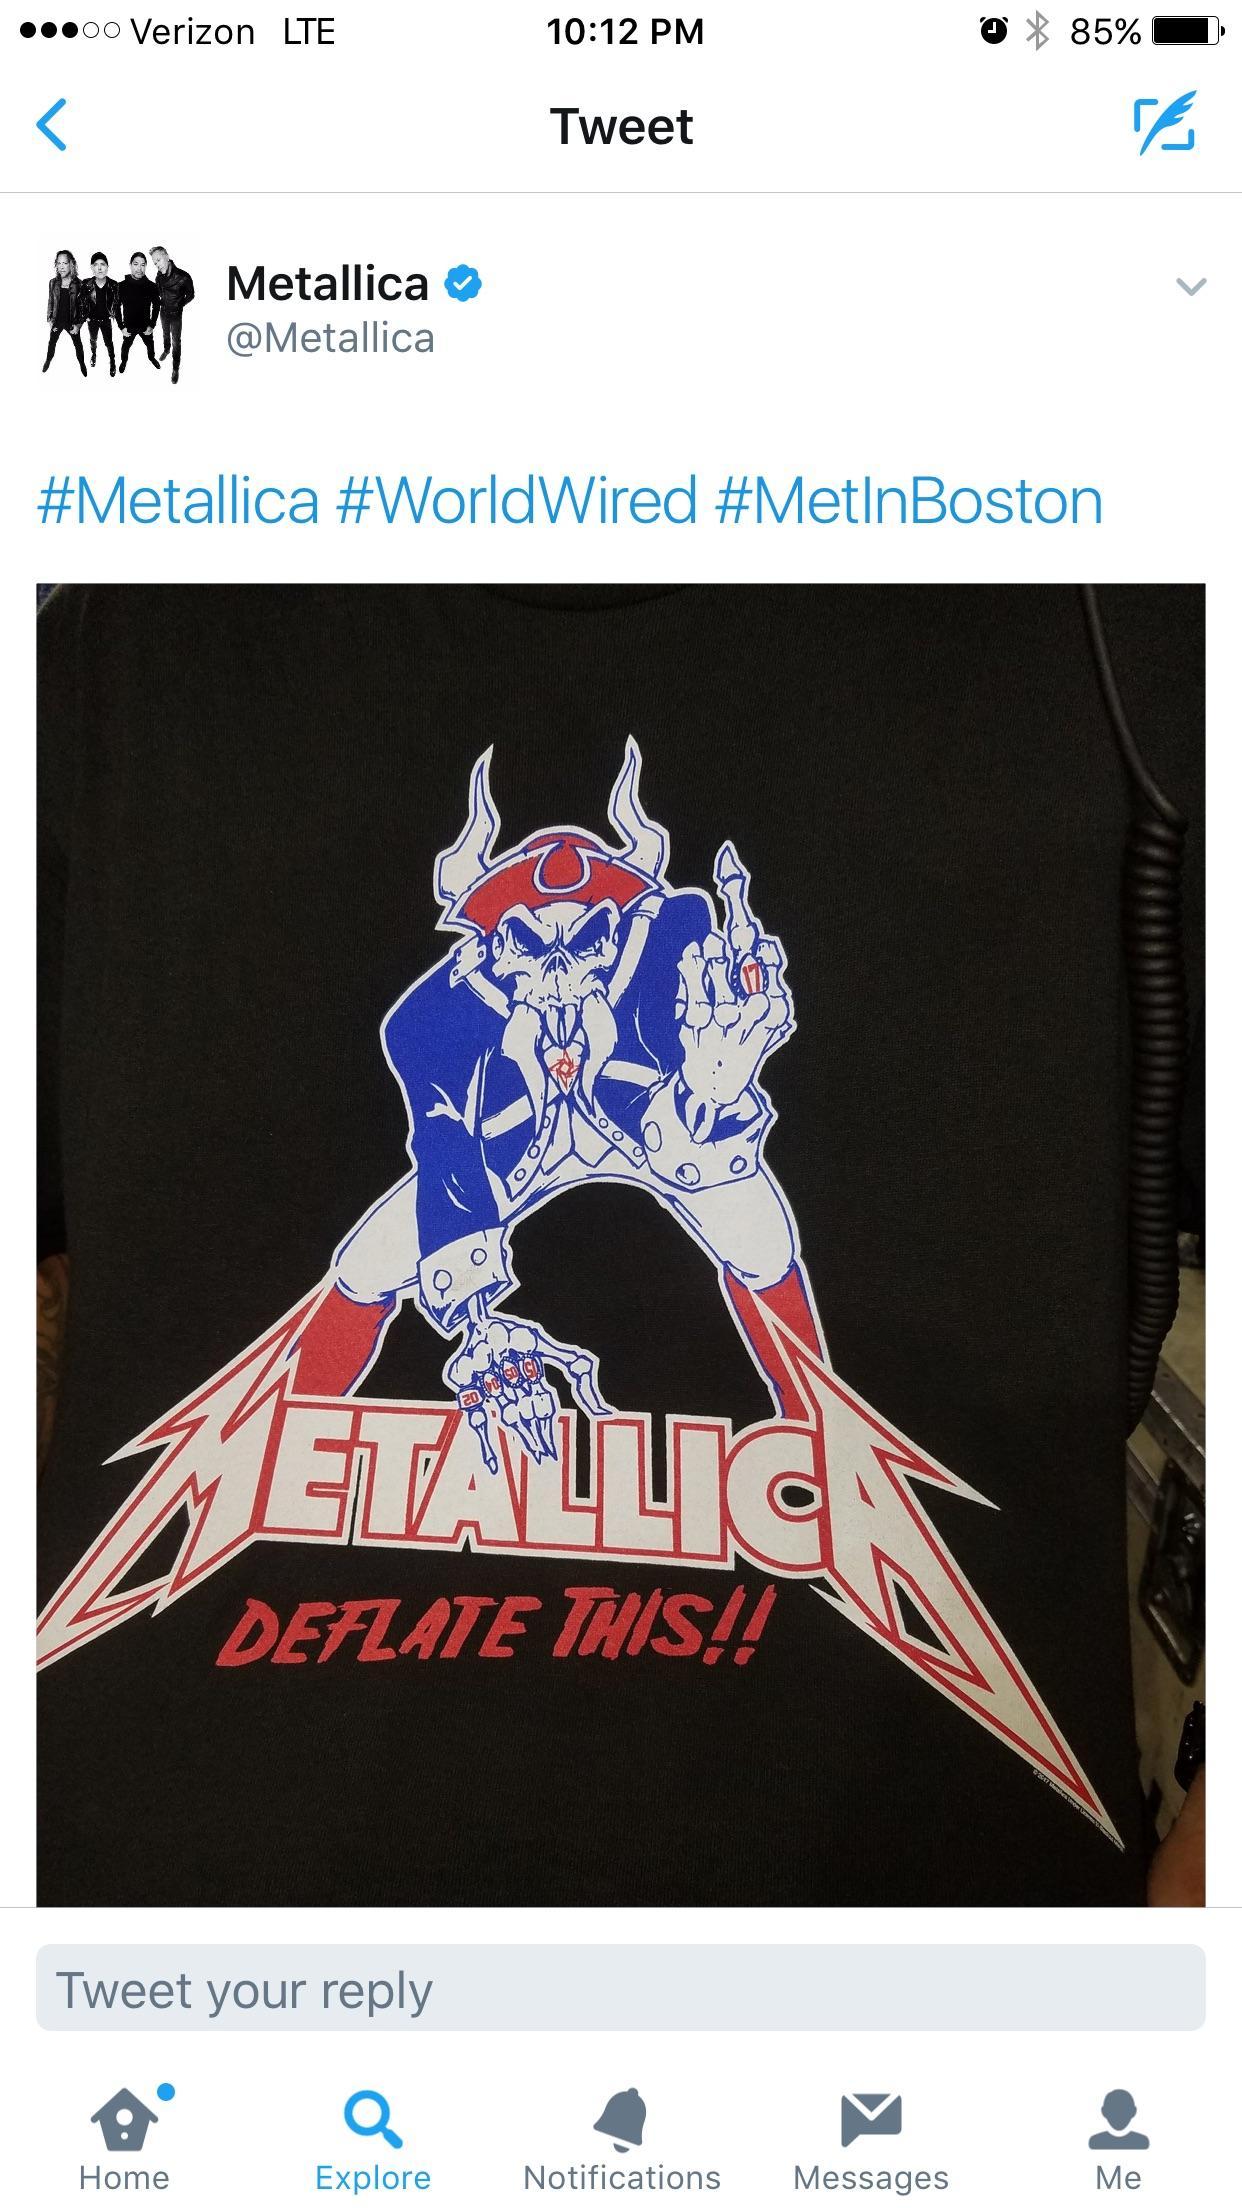 Deflate Logo - Shirt from tonight's Metallica show at Gillette : Patriots